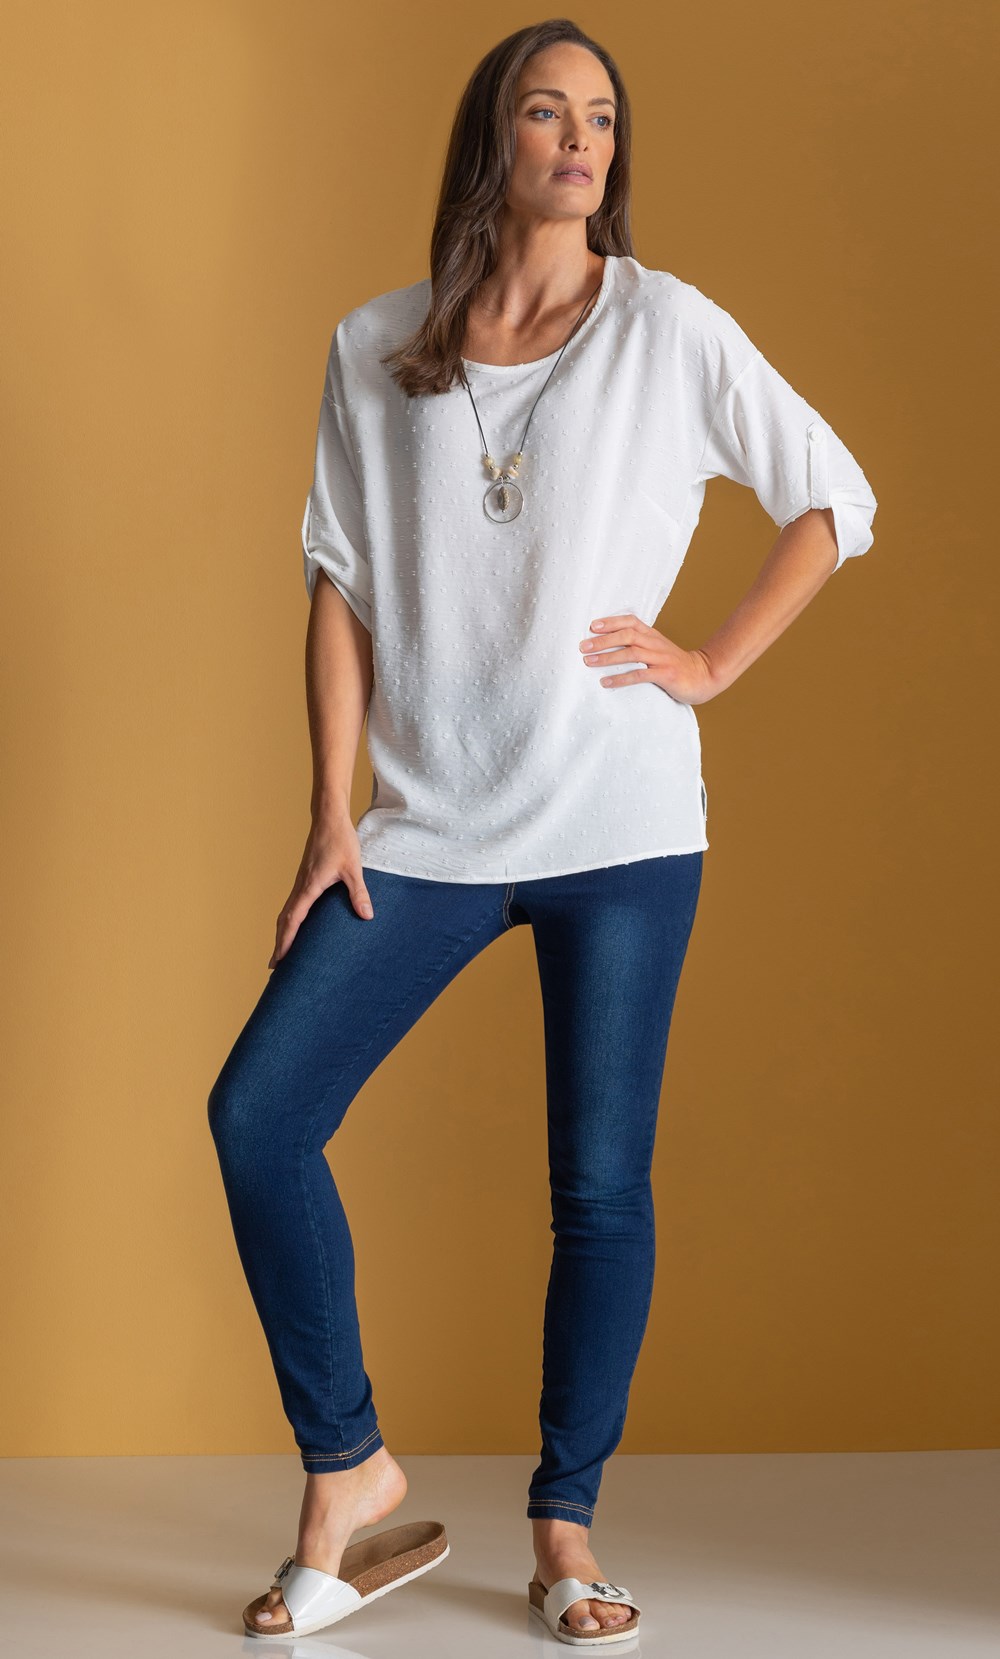 Dot Textured Top With Necklace